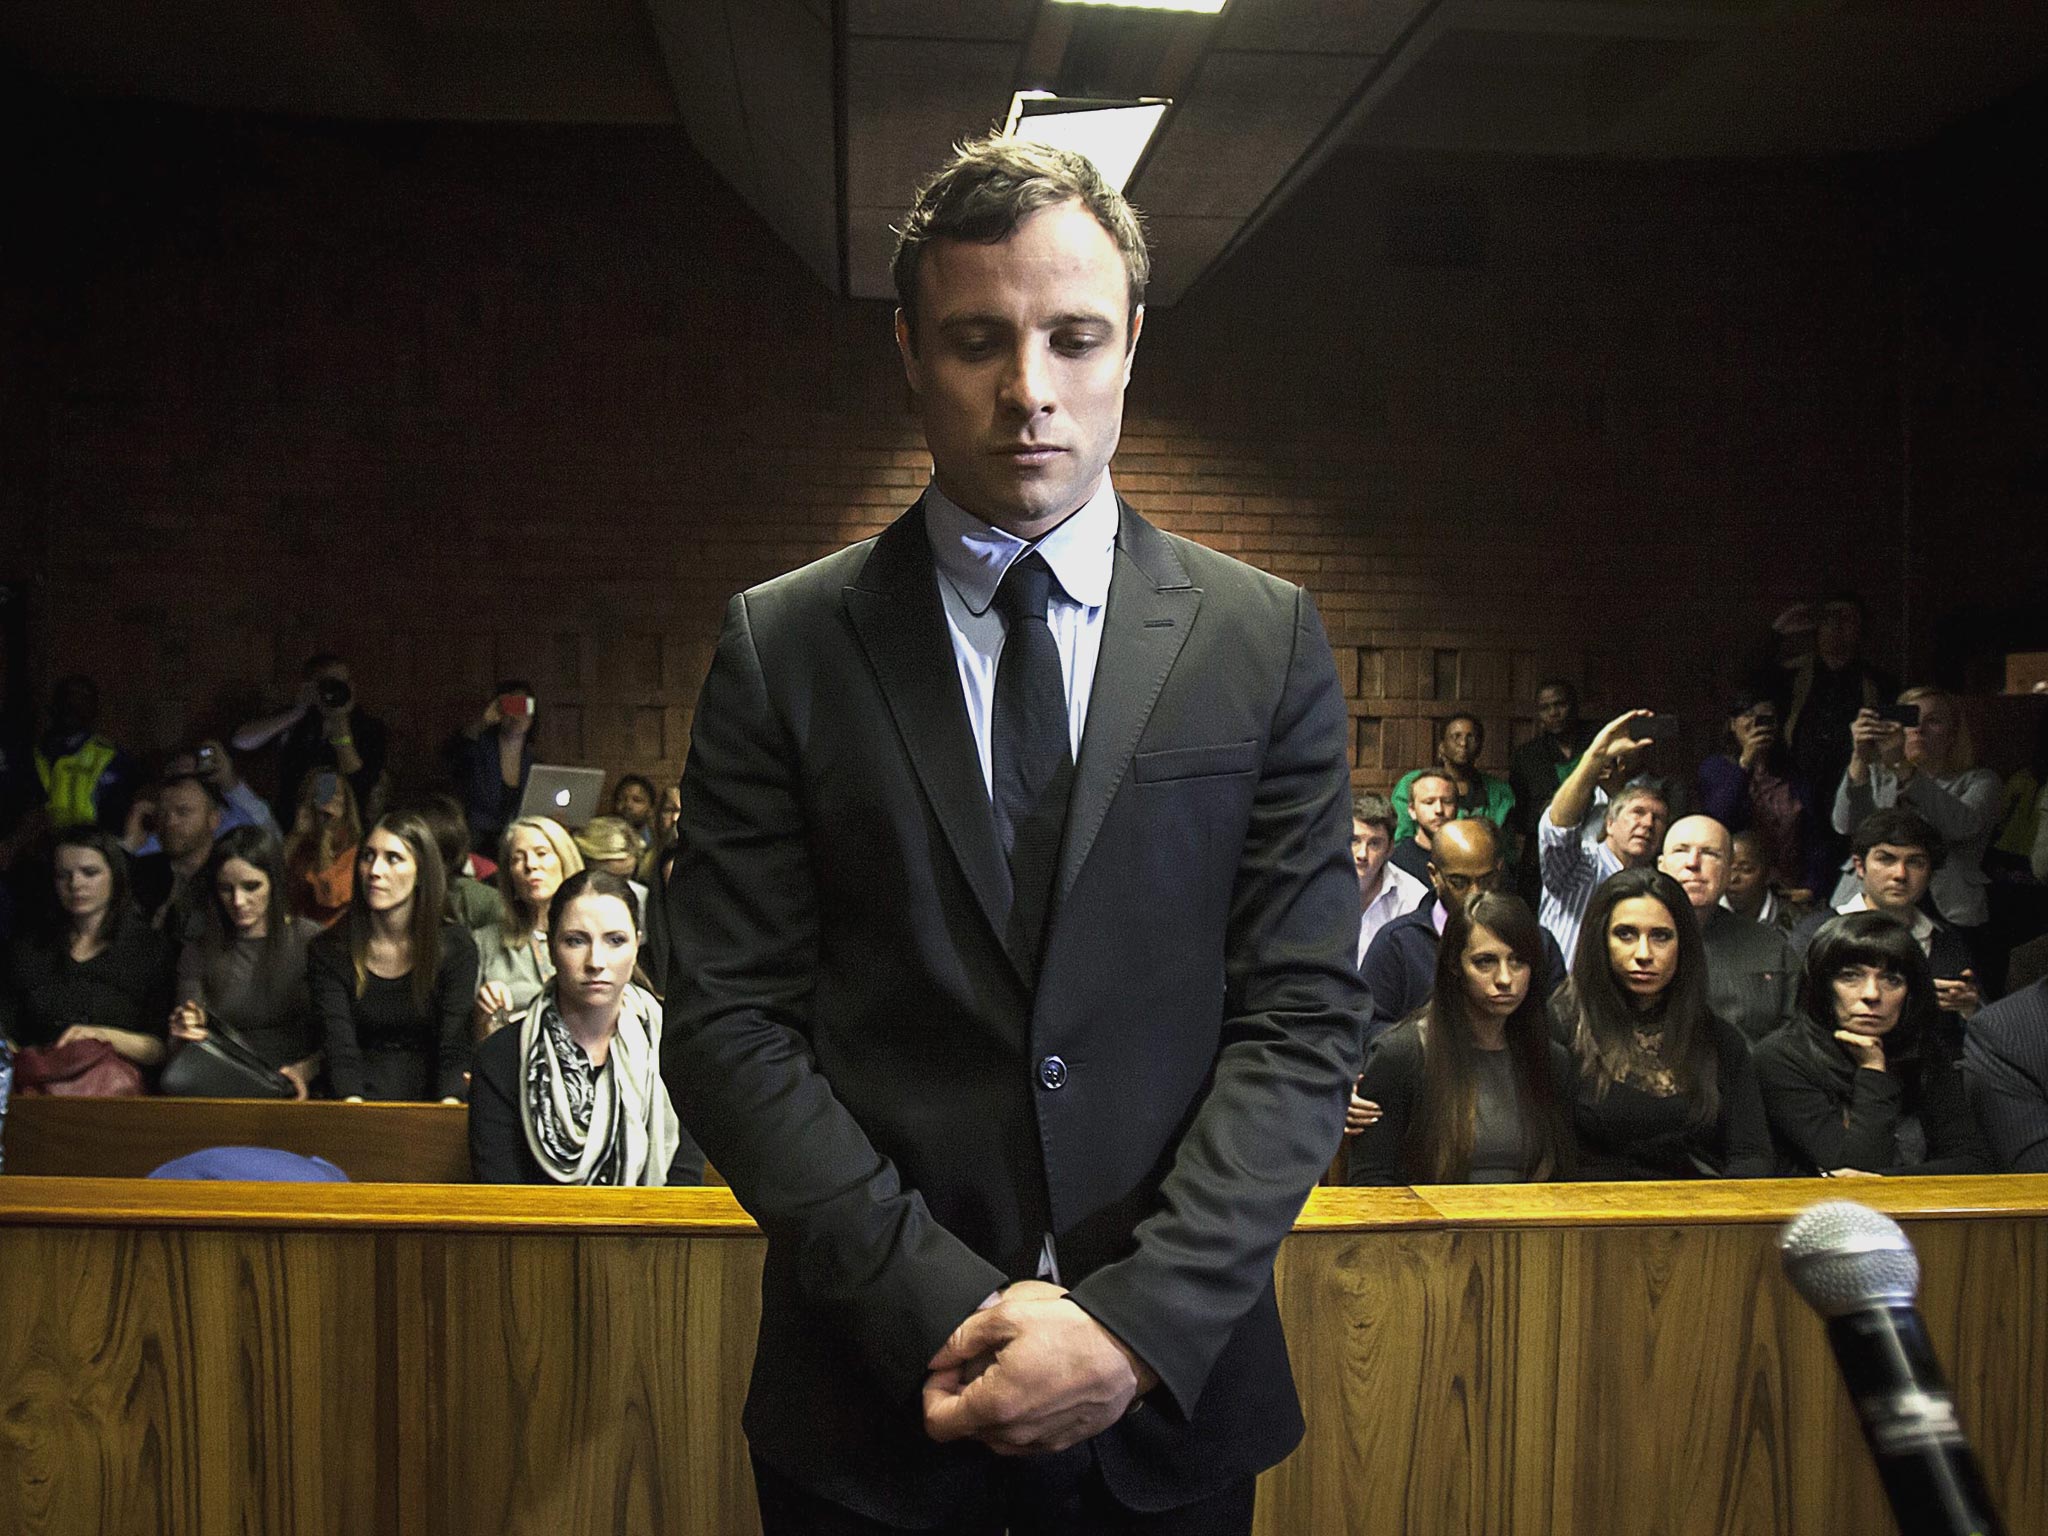 The accused: Oscar Pistorius appears at Pretoria magistrates’ court at a preliminary hearing in August 2013